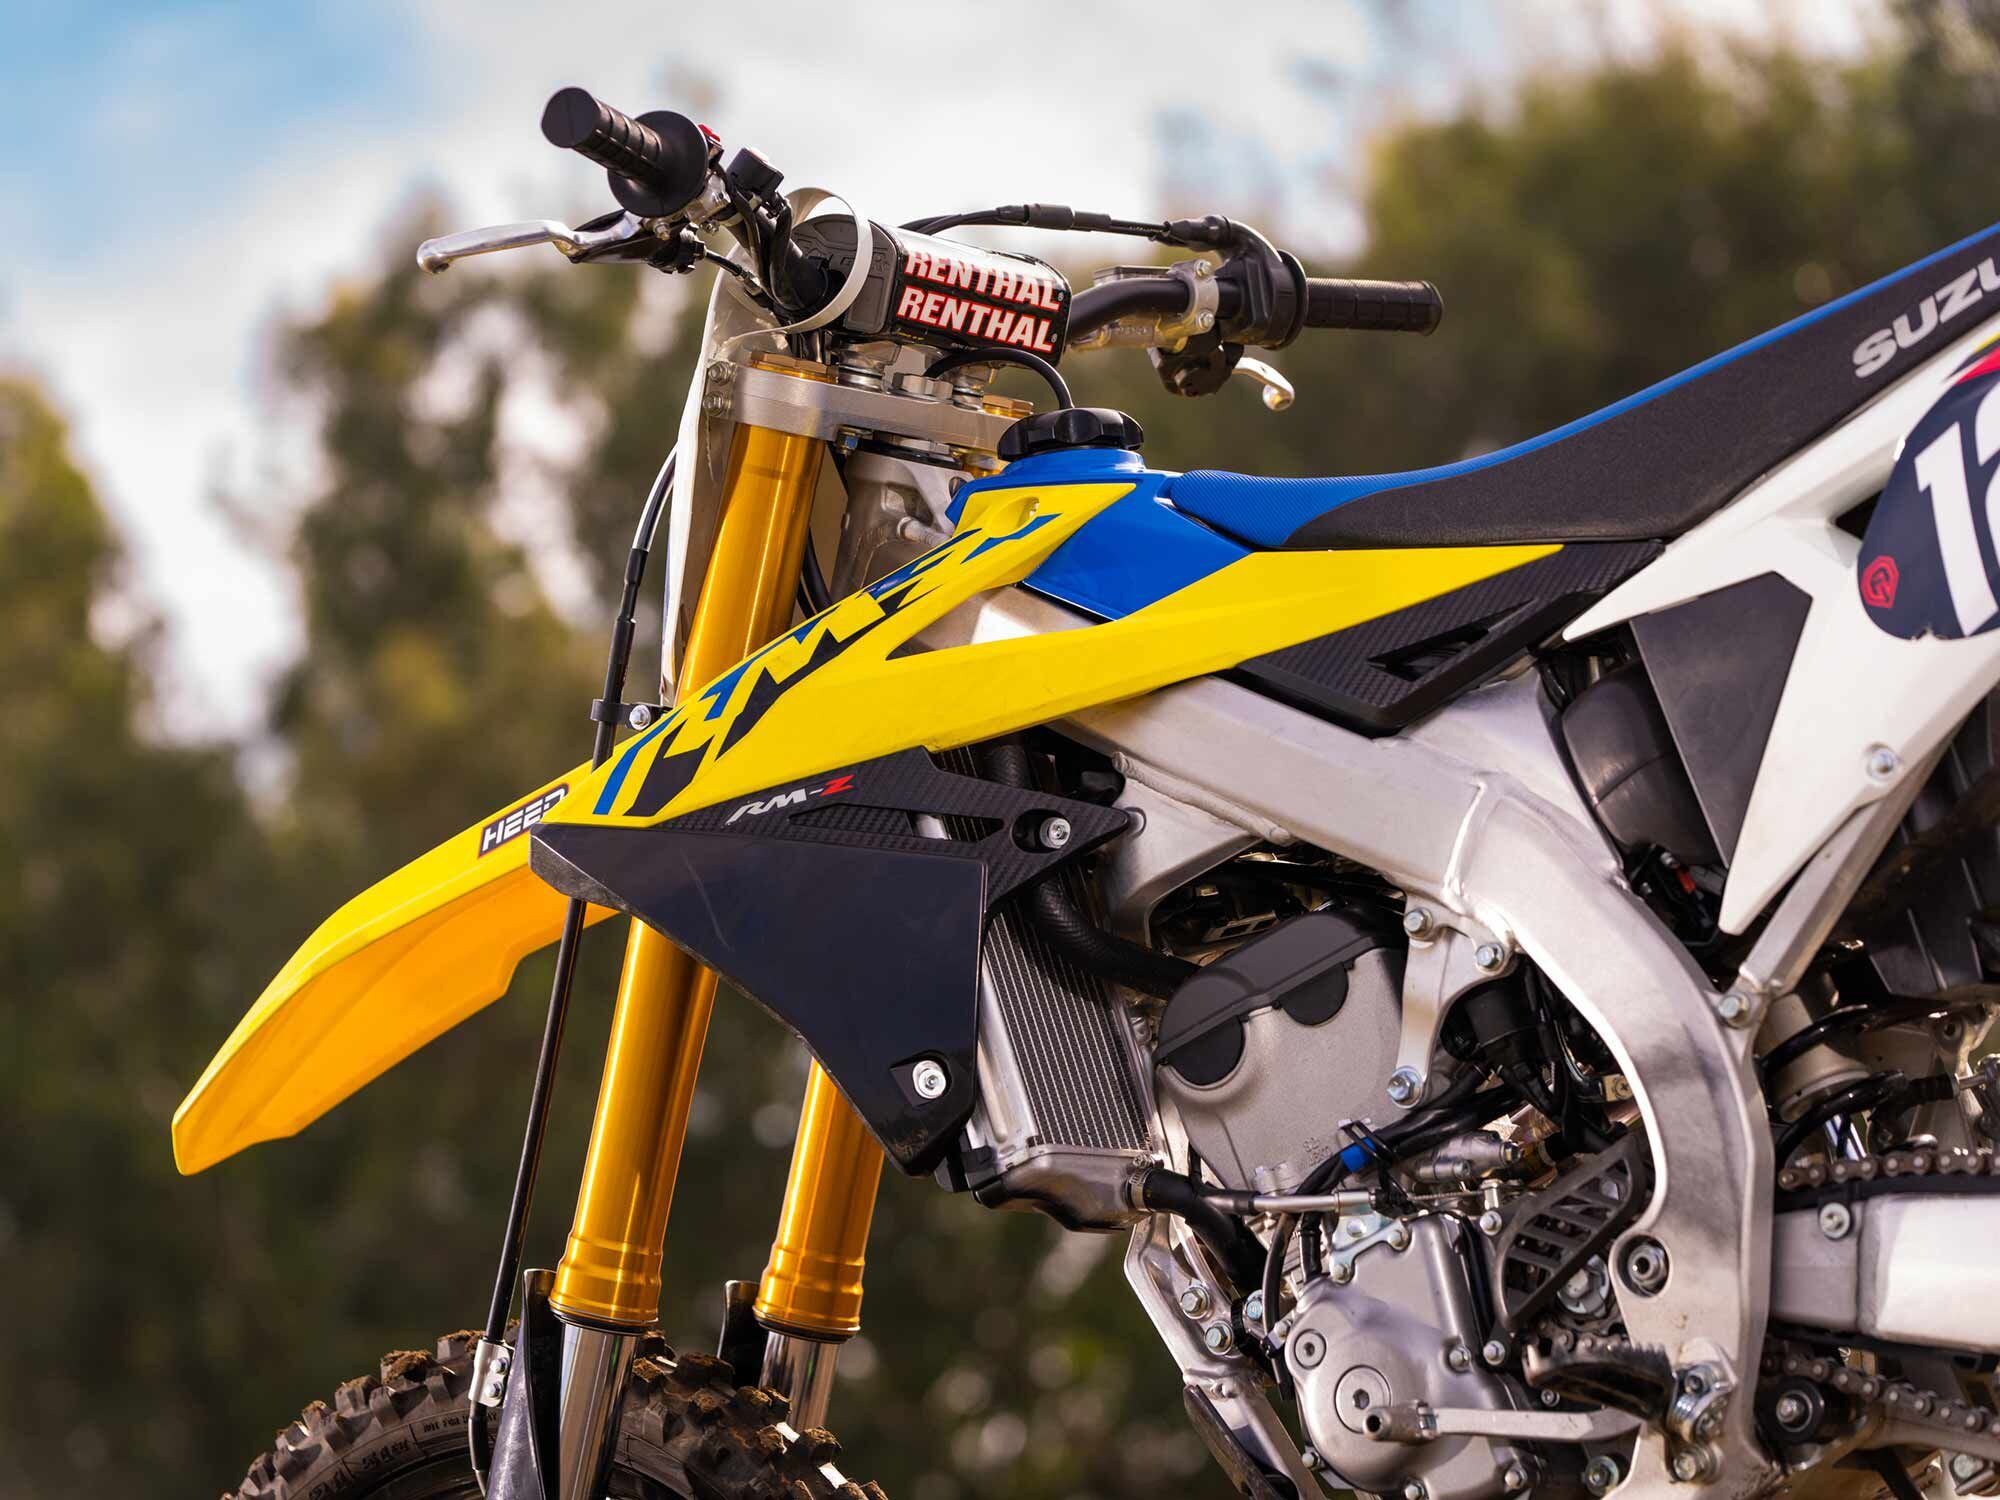 While the RM-Z250 lacks some of the competition’s modern accoutrements, it looks cool in its Champion Yellow No. 2 colorway.